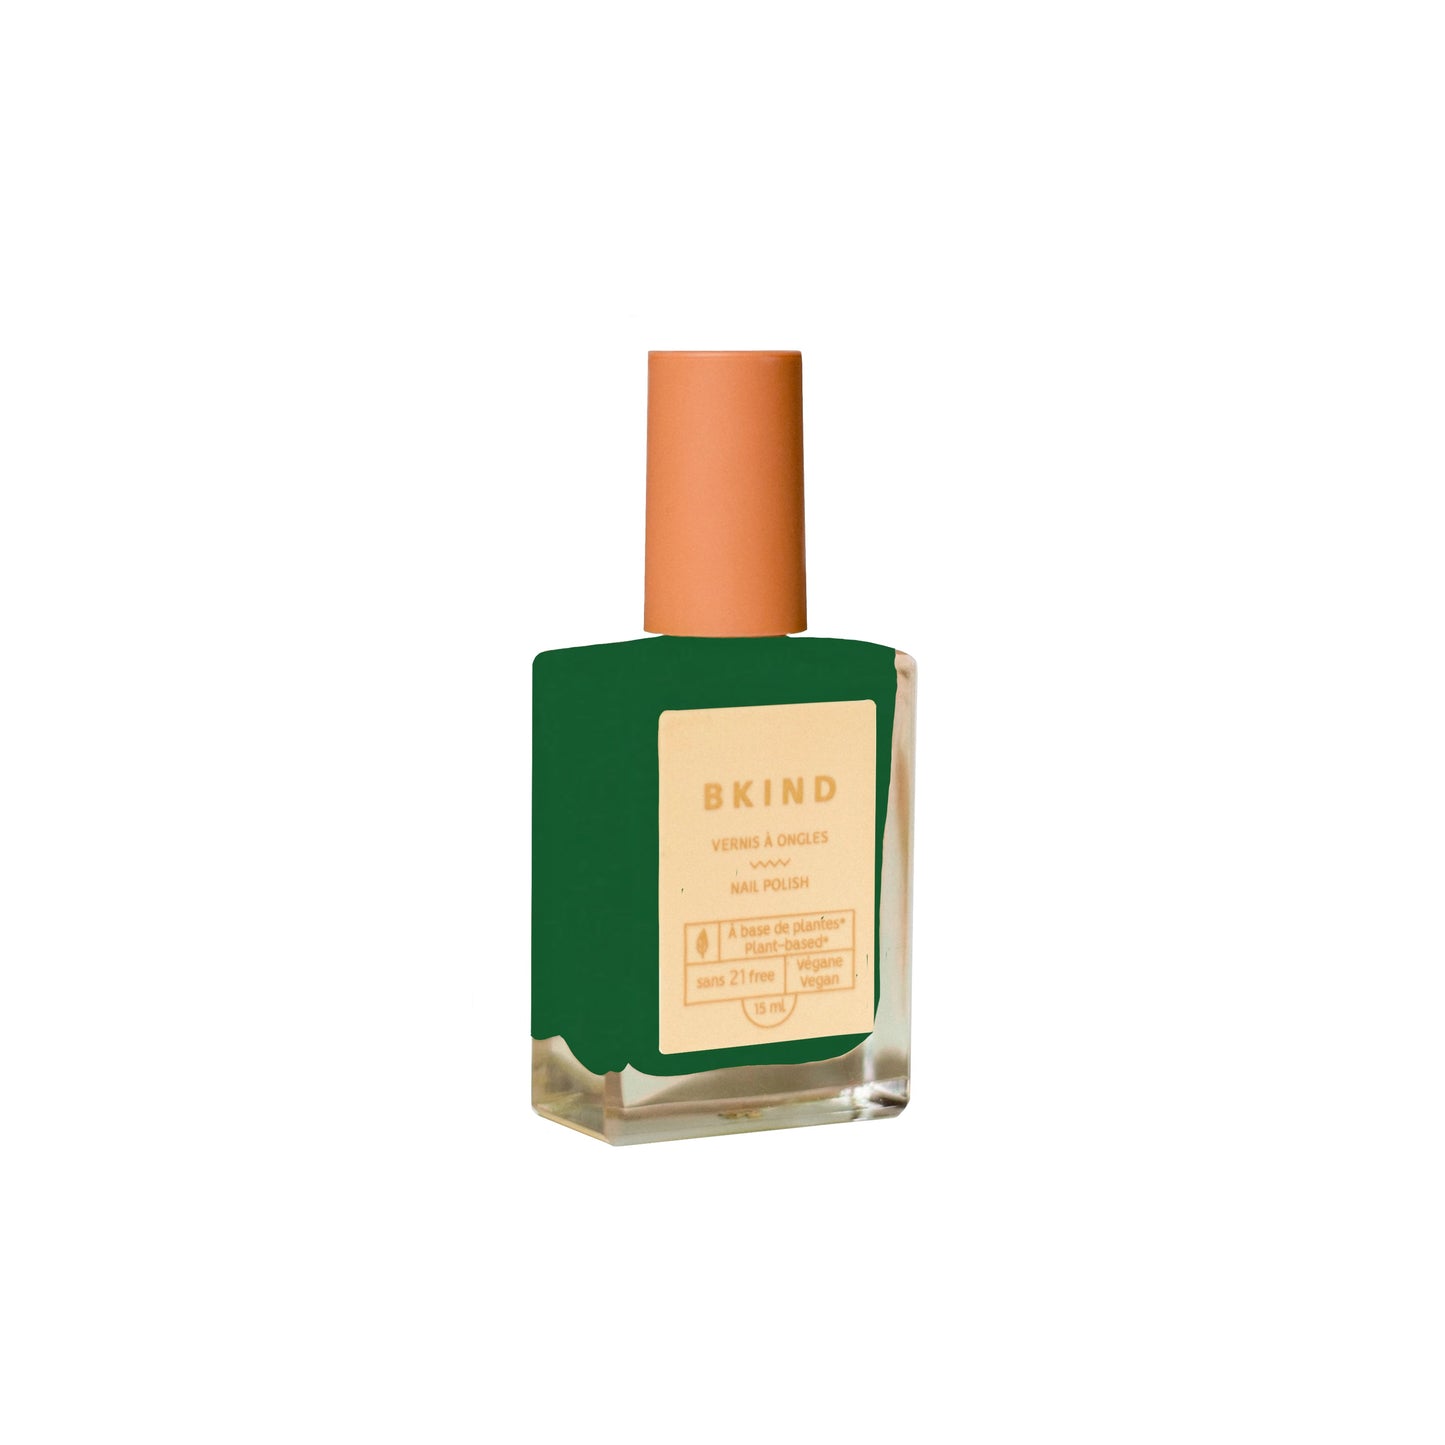 Grenouille Nail Polish by BKIND